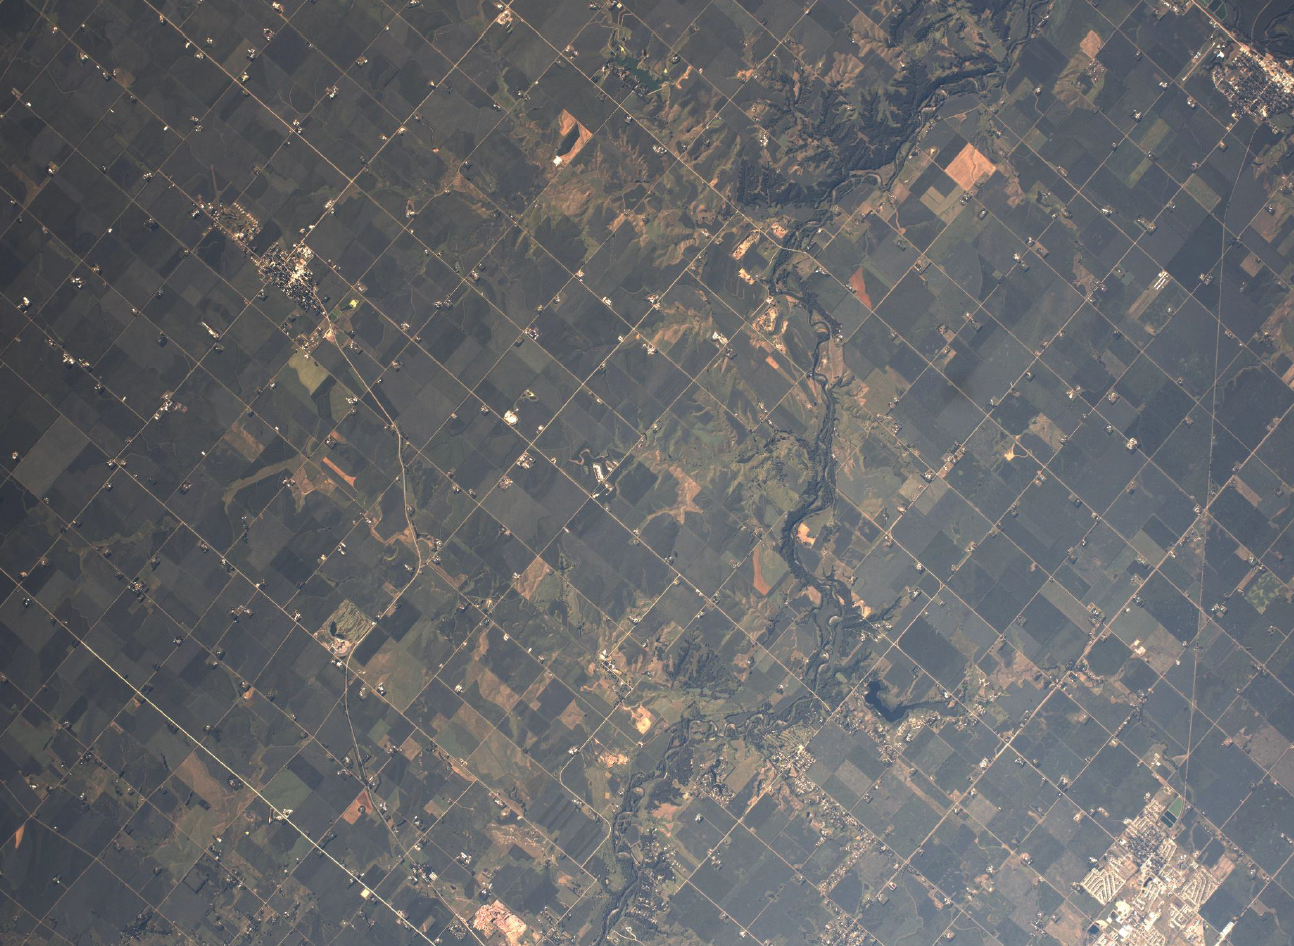 In-flight image data: The Orion Labs’ payload collected several thousand images, including many images of dams and waterways in Sioux Falls, South Dakota.